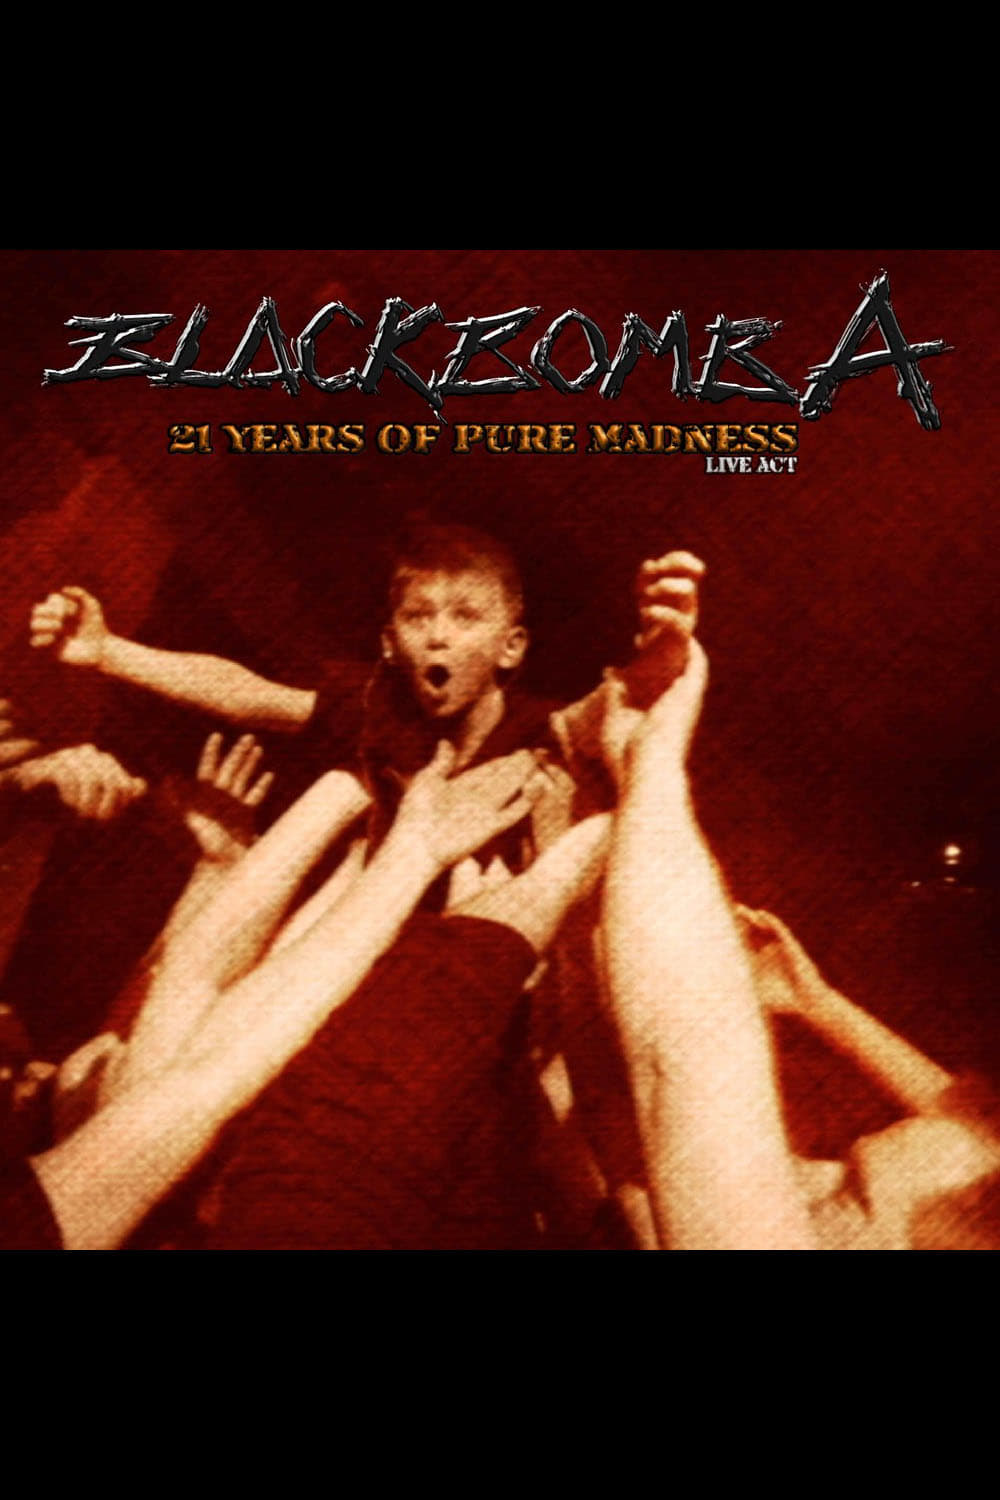 Black Bomb Ä: 21 years of pure madness live act